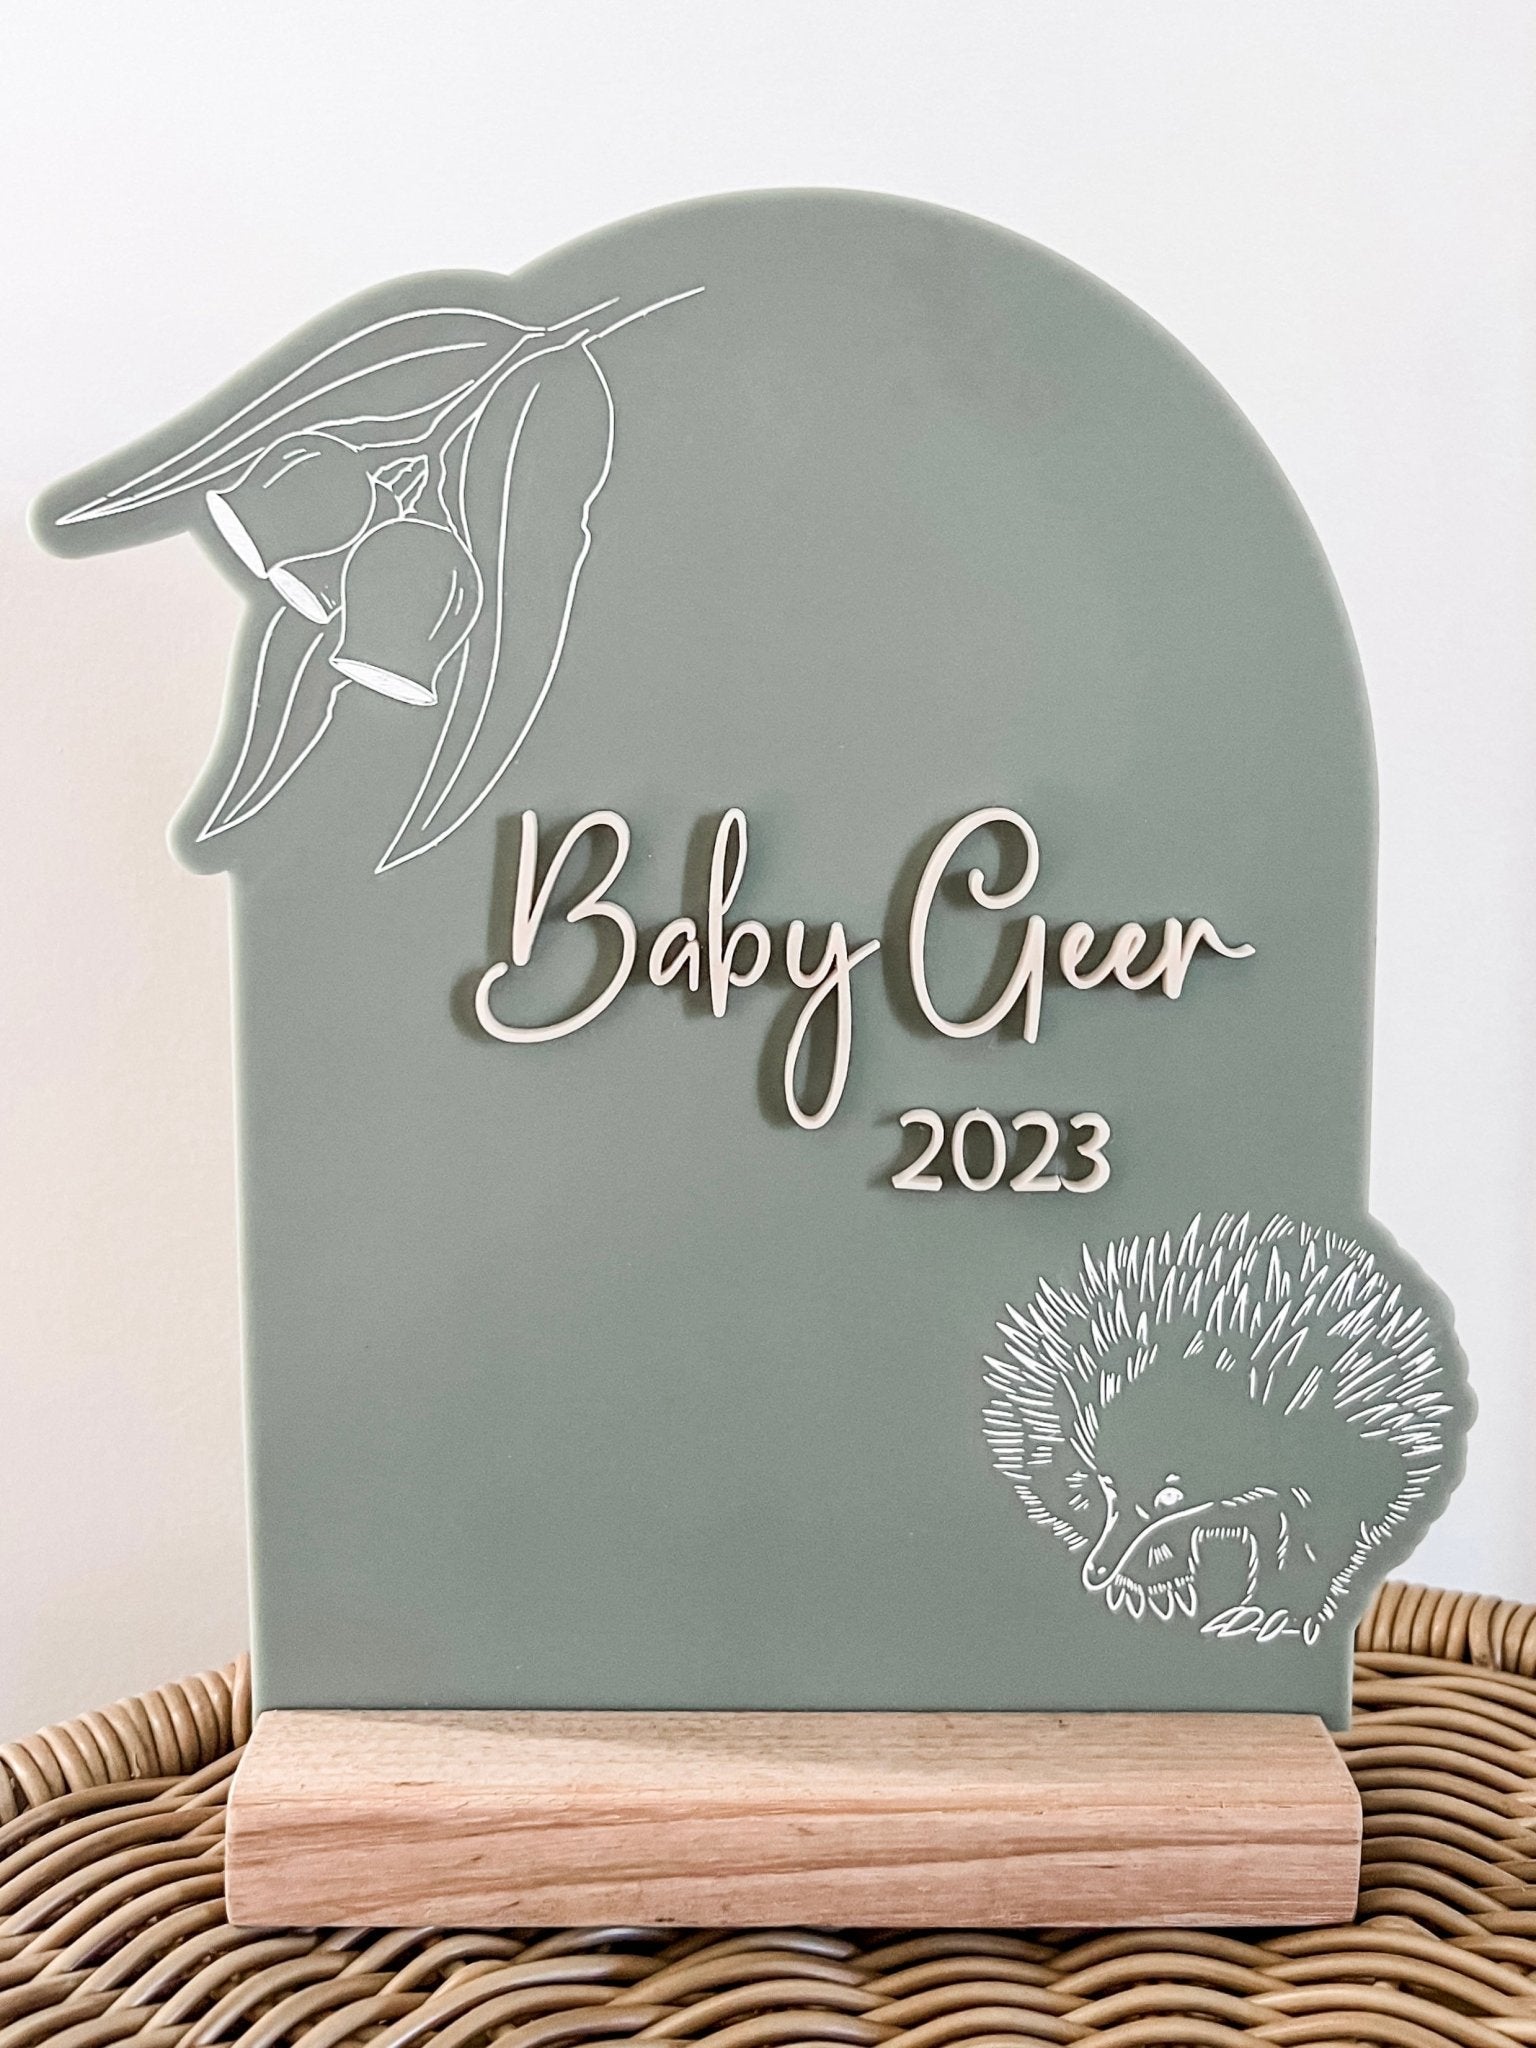 Australian Theme Baby Announcement Plaque - The Humble Gift Co.